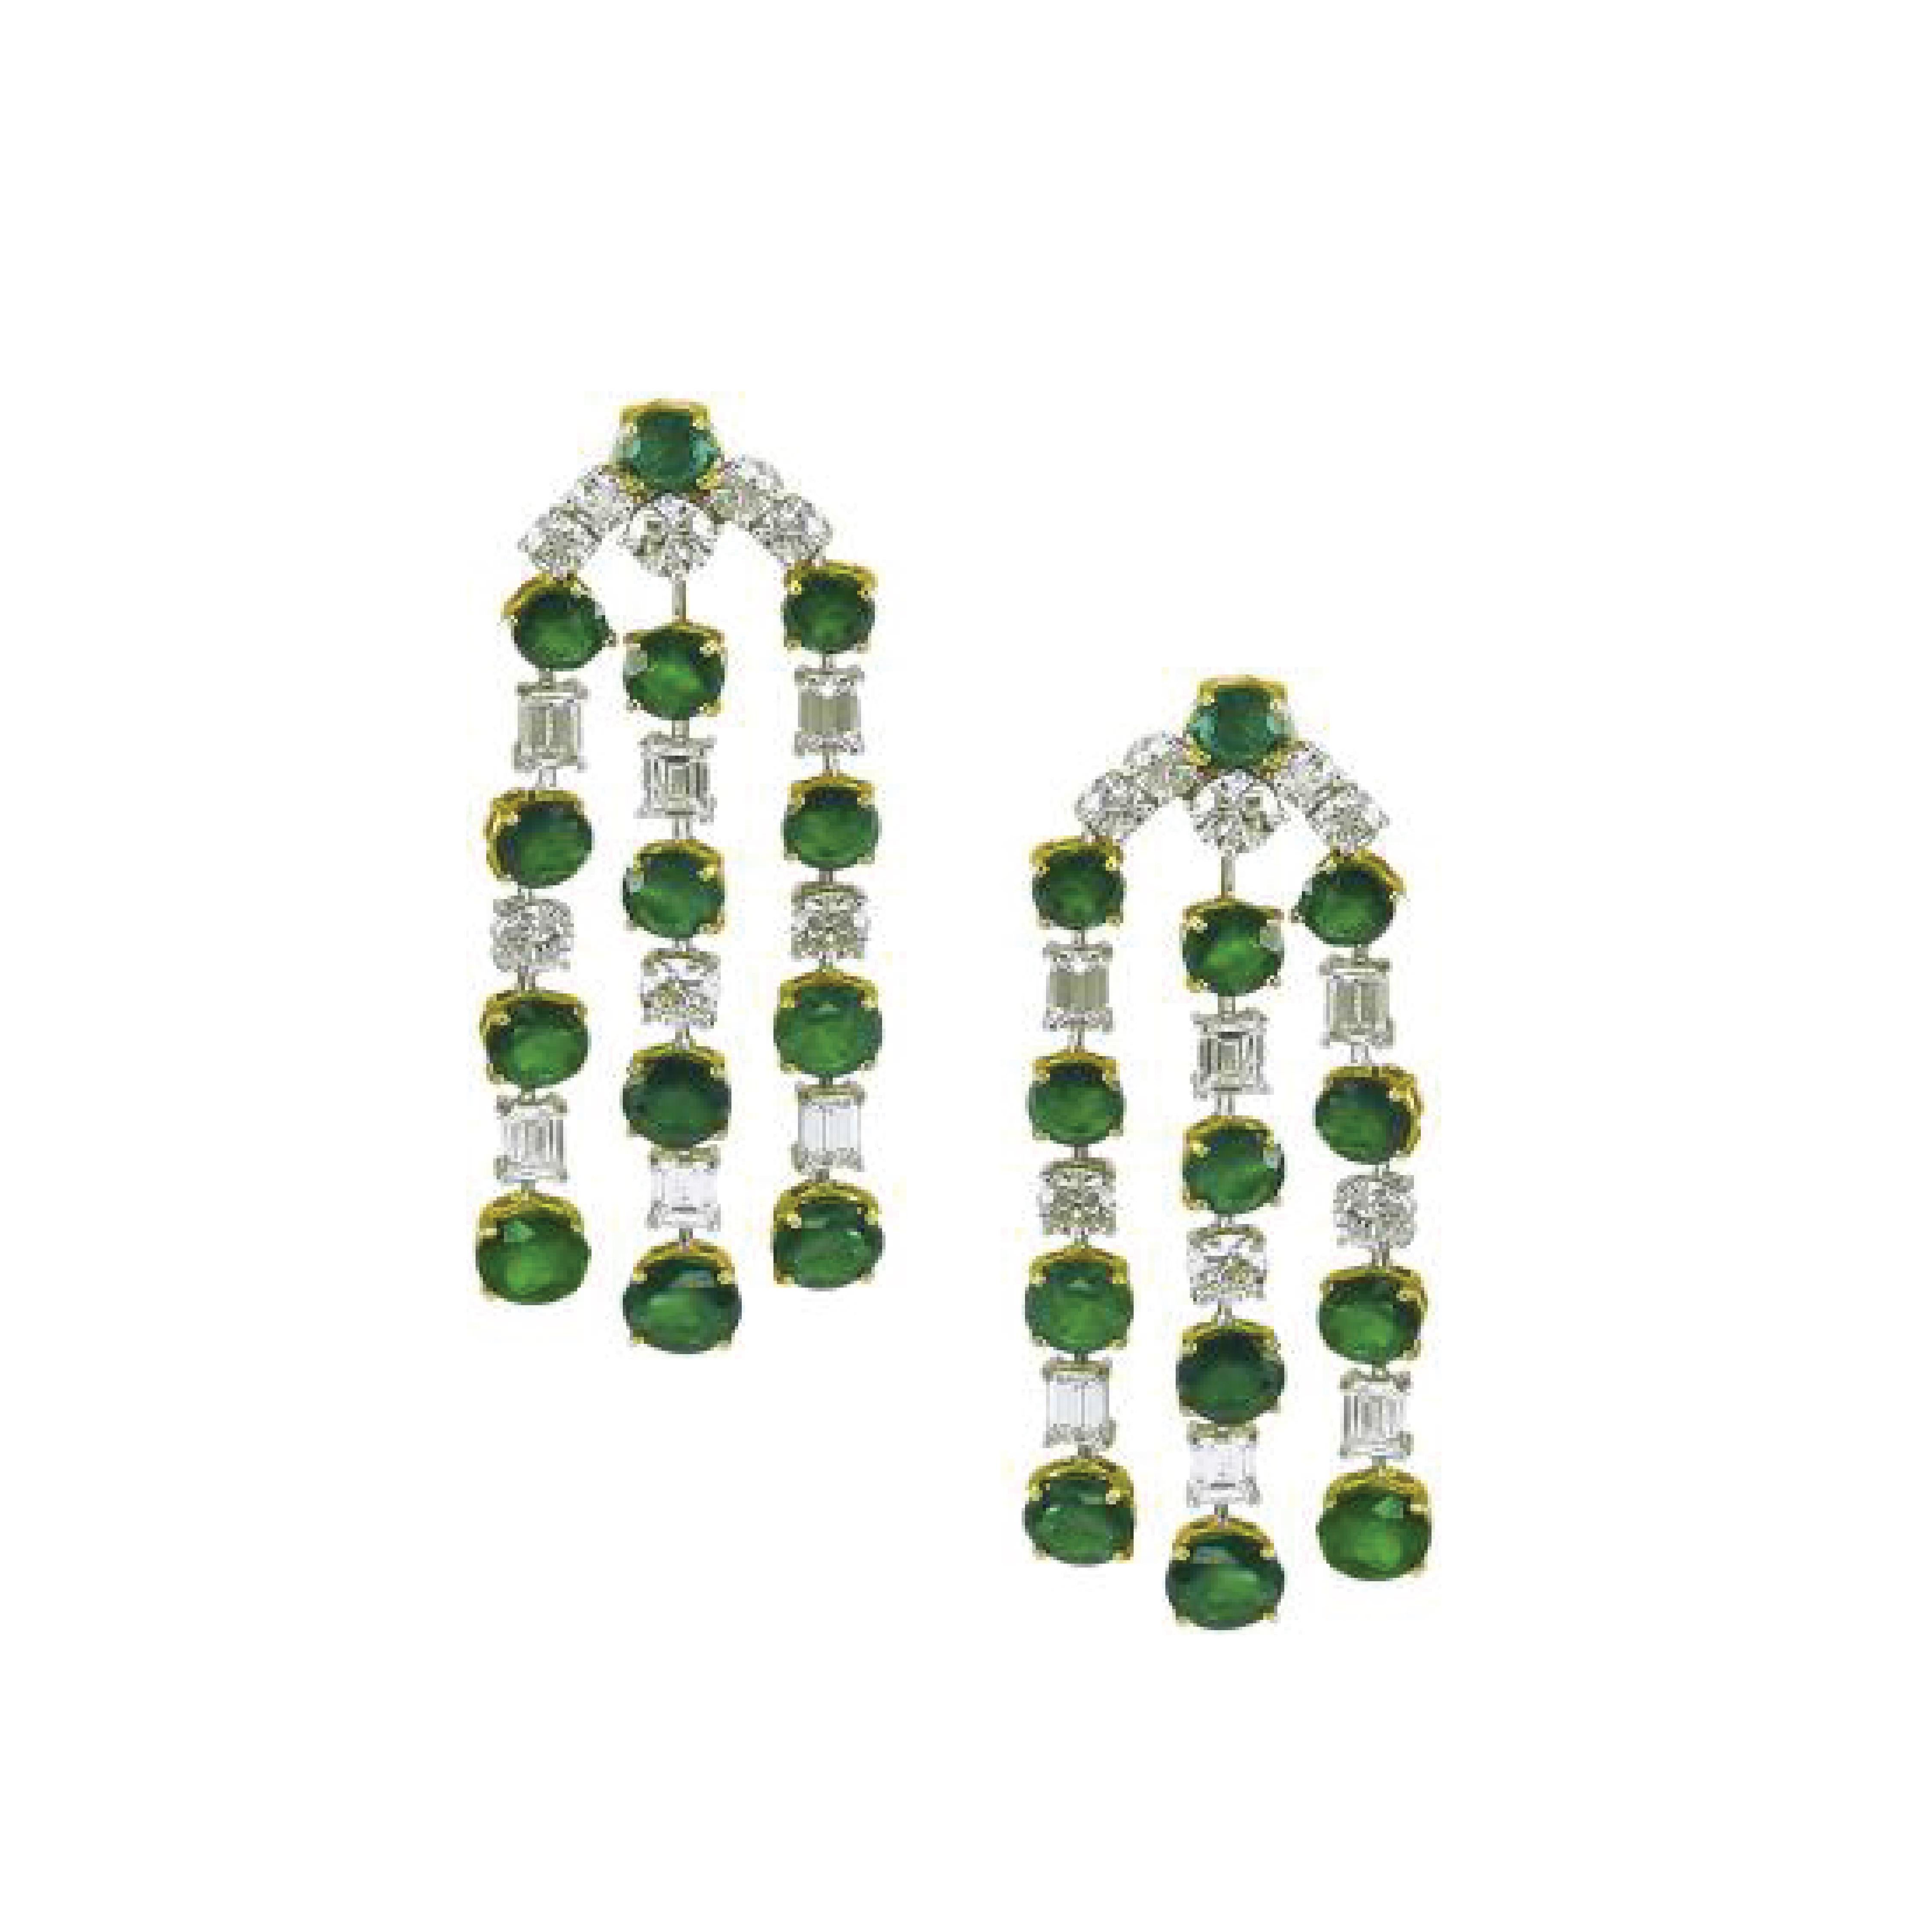 ​Platinum and 18K Yellow Gold Chandelier Earrings with Emeralds total weighing 13.71 carats and Diamonds weighing 6.78 carats.

Sophia D by Joseph Dardashti LTD has been known worldwide for 35 years and are inspired by classic Art Deco design that